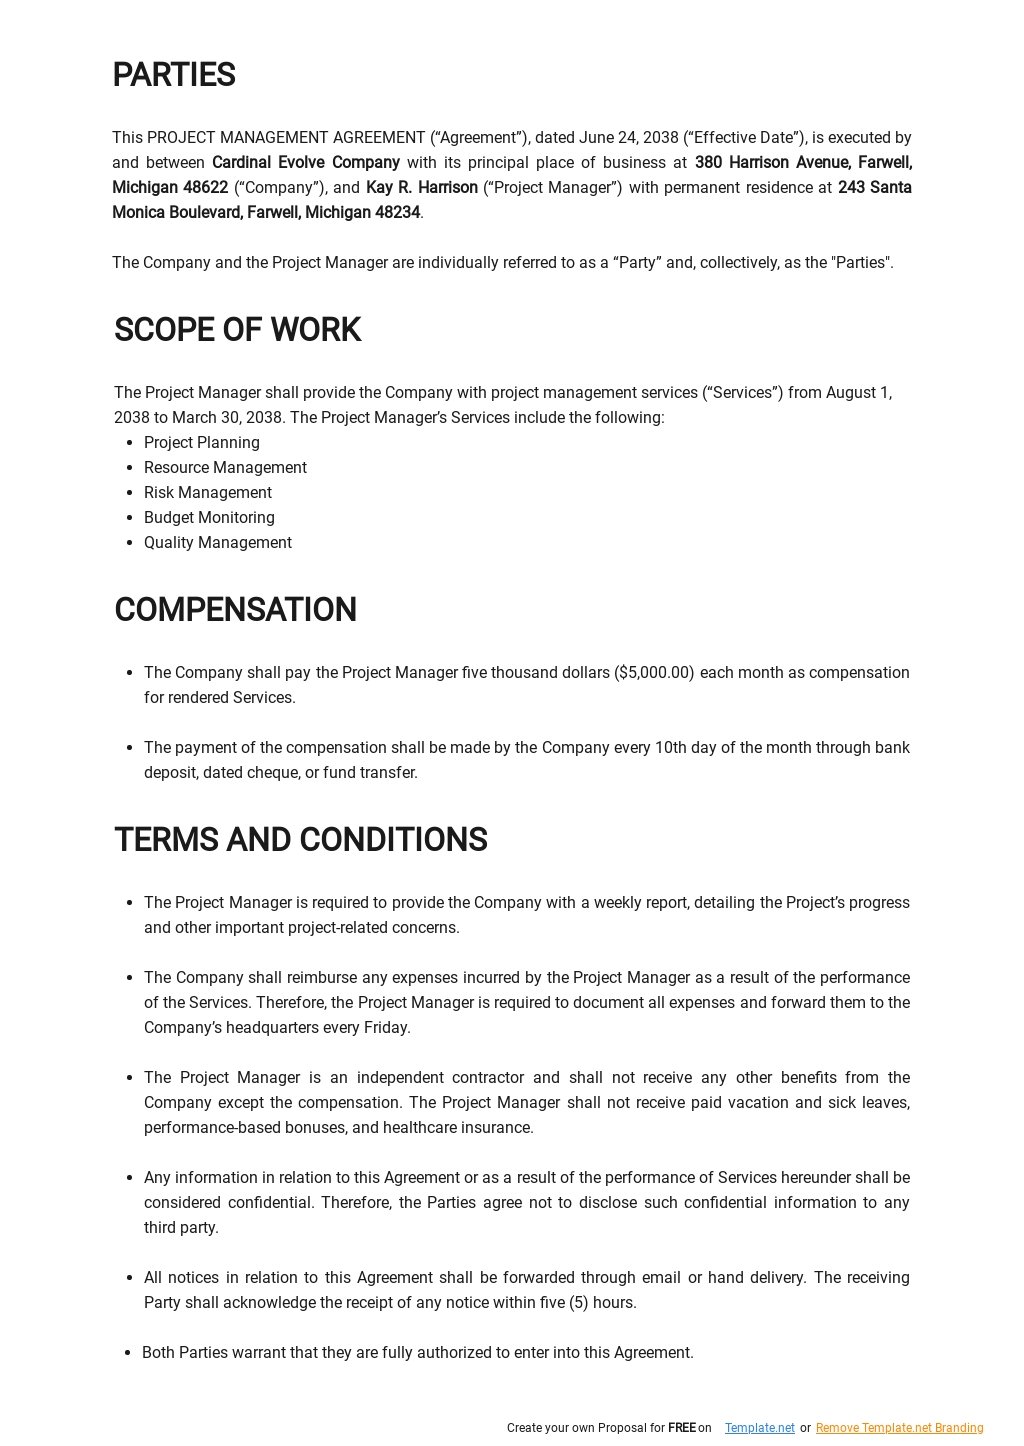 Project Management Agreement Template [Free PDF]